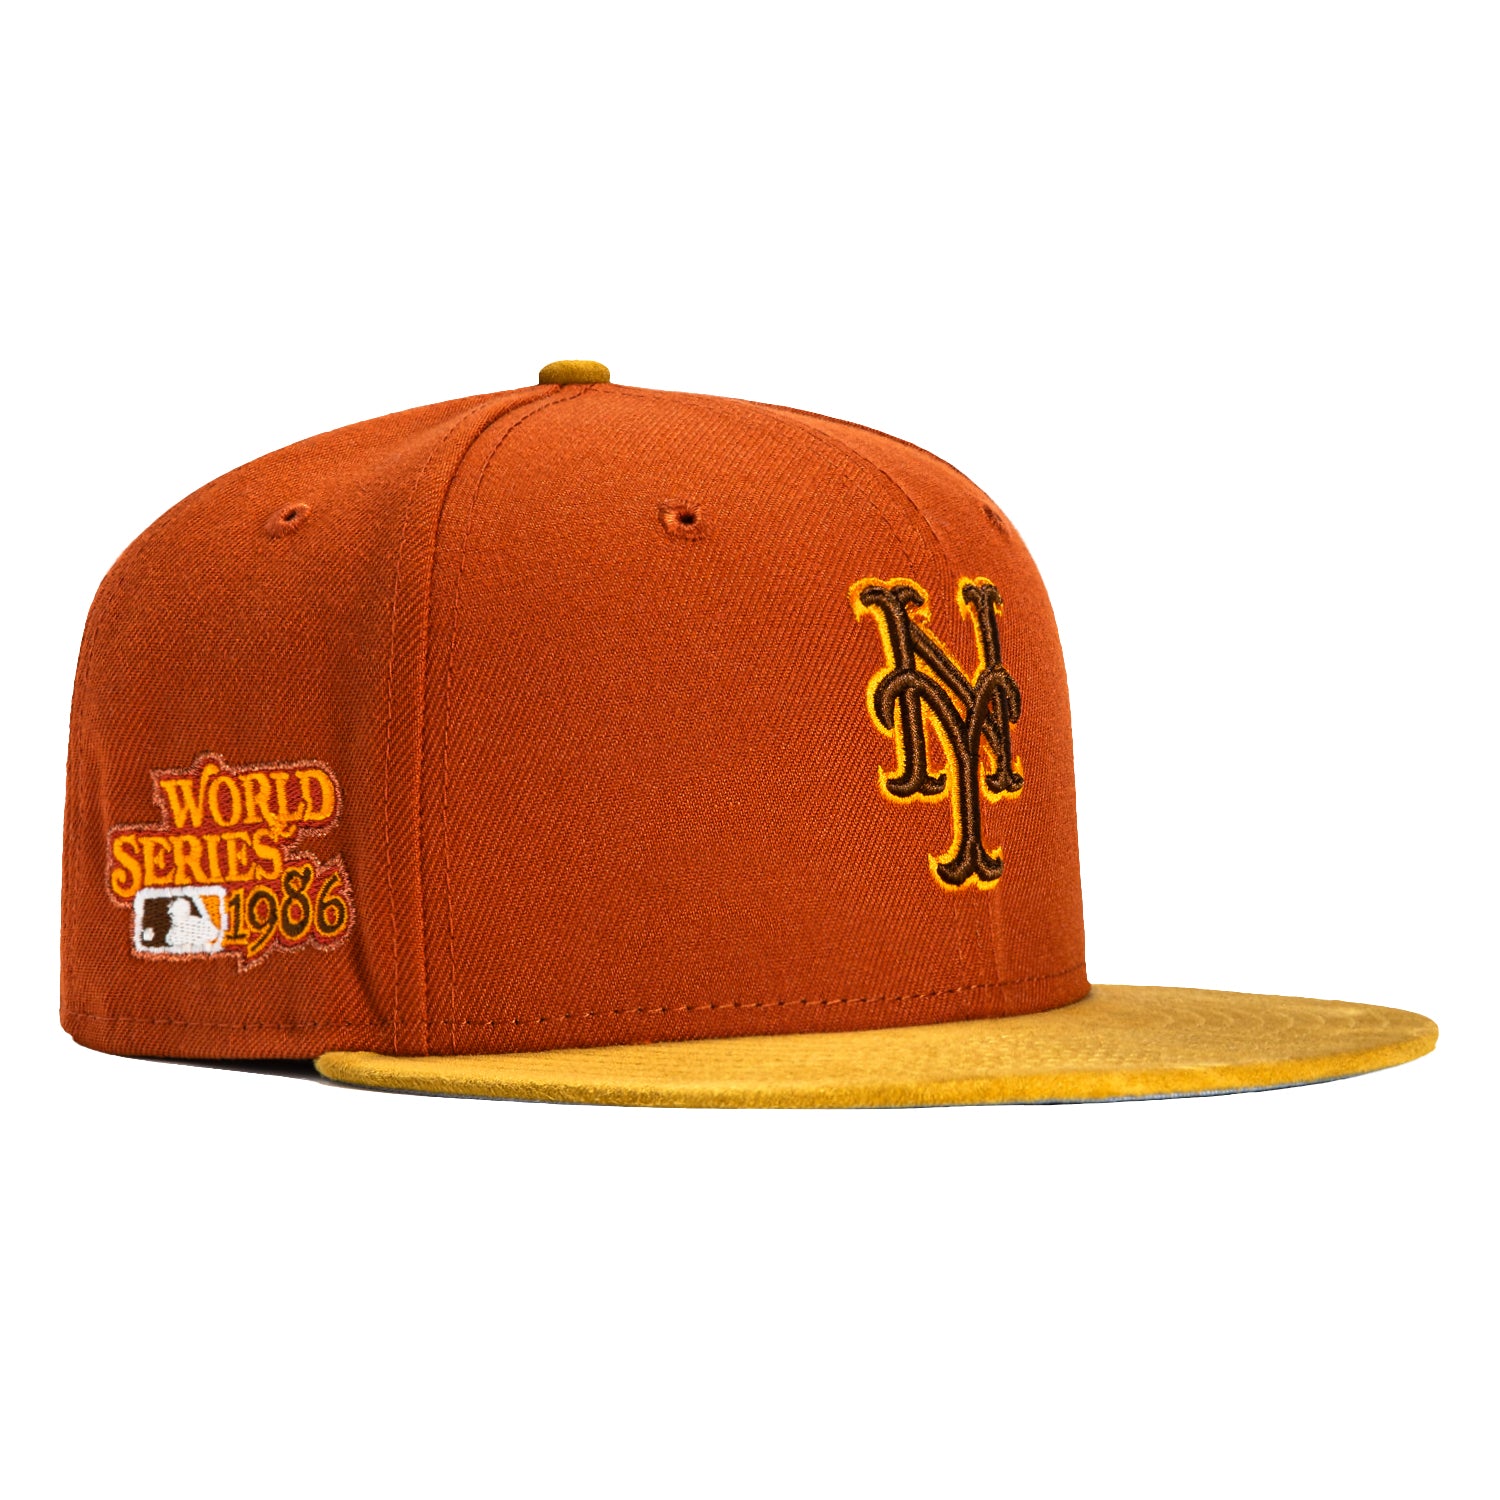 New York Yankees New Era Red Under Visor 59FIFTY Fitted Hat - Gold